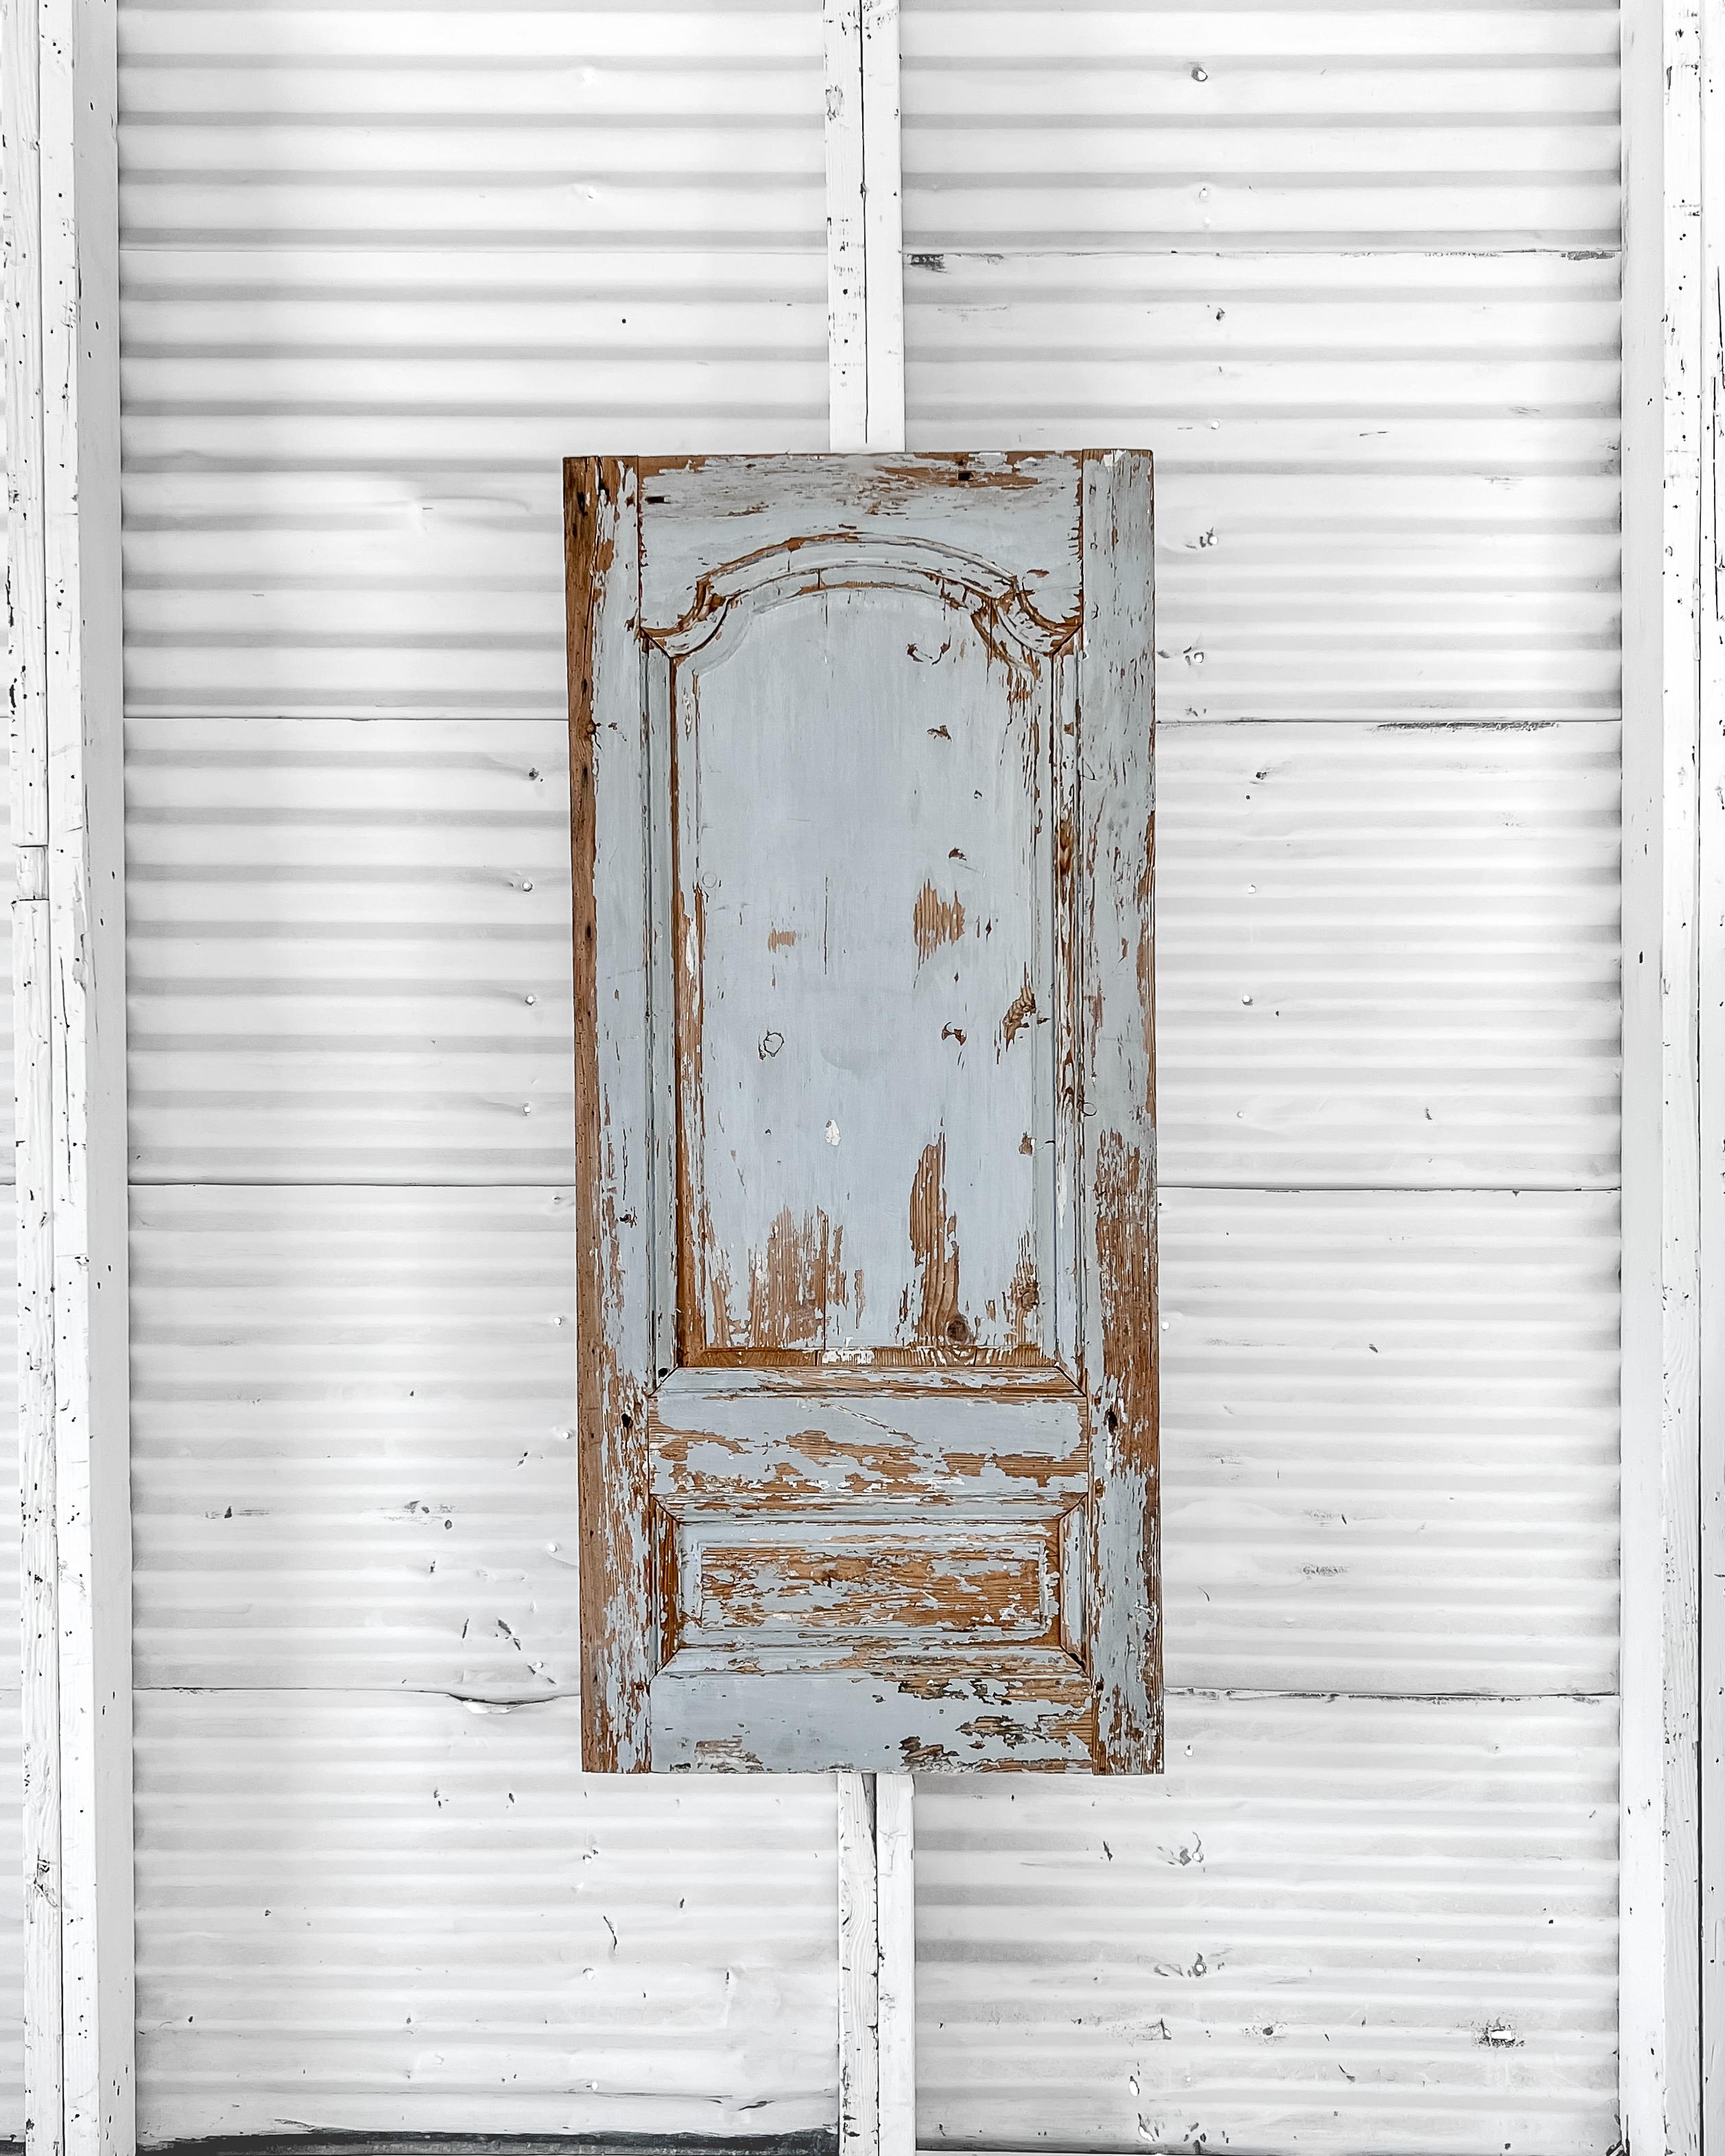 A beautiful mid-19th century, decorative provincial architectural wood wall panel with original worn “French blue” paint.

Enhance an empty wall with this wonderful work of art to add architectural interest and a sense of history to your modern